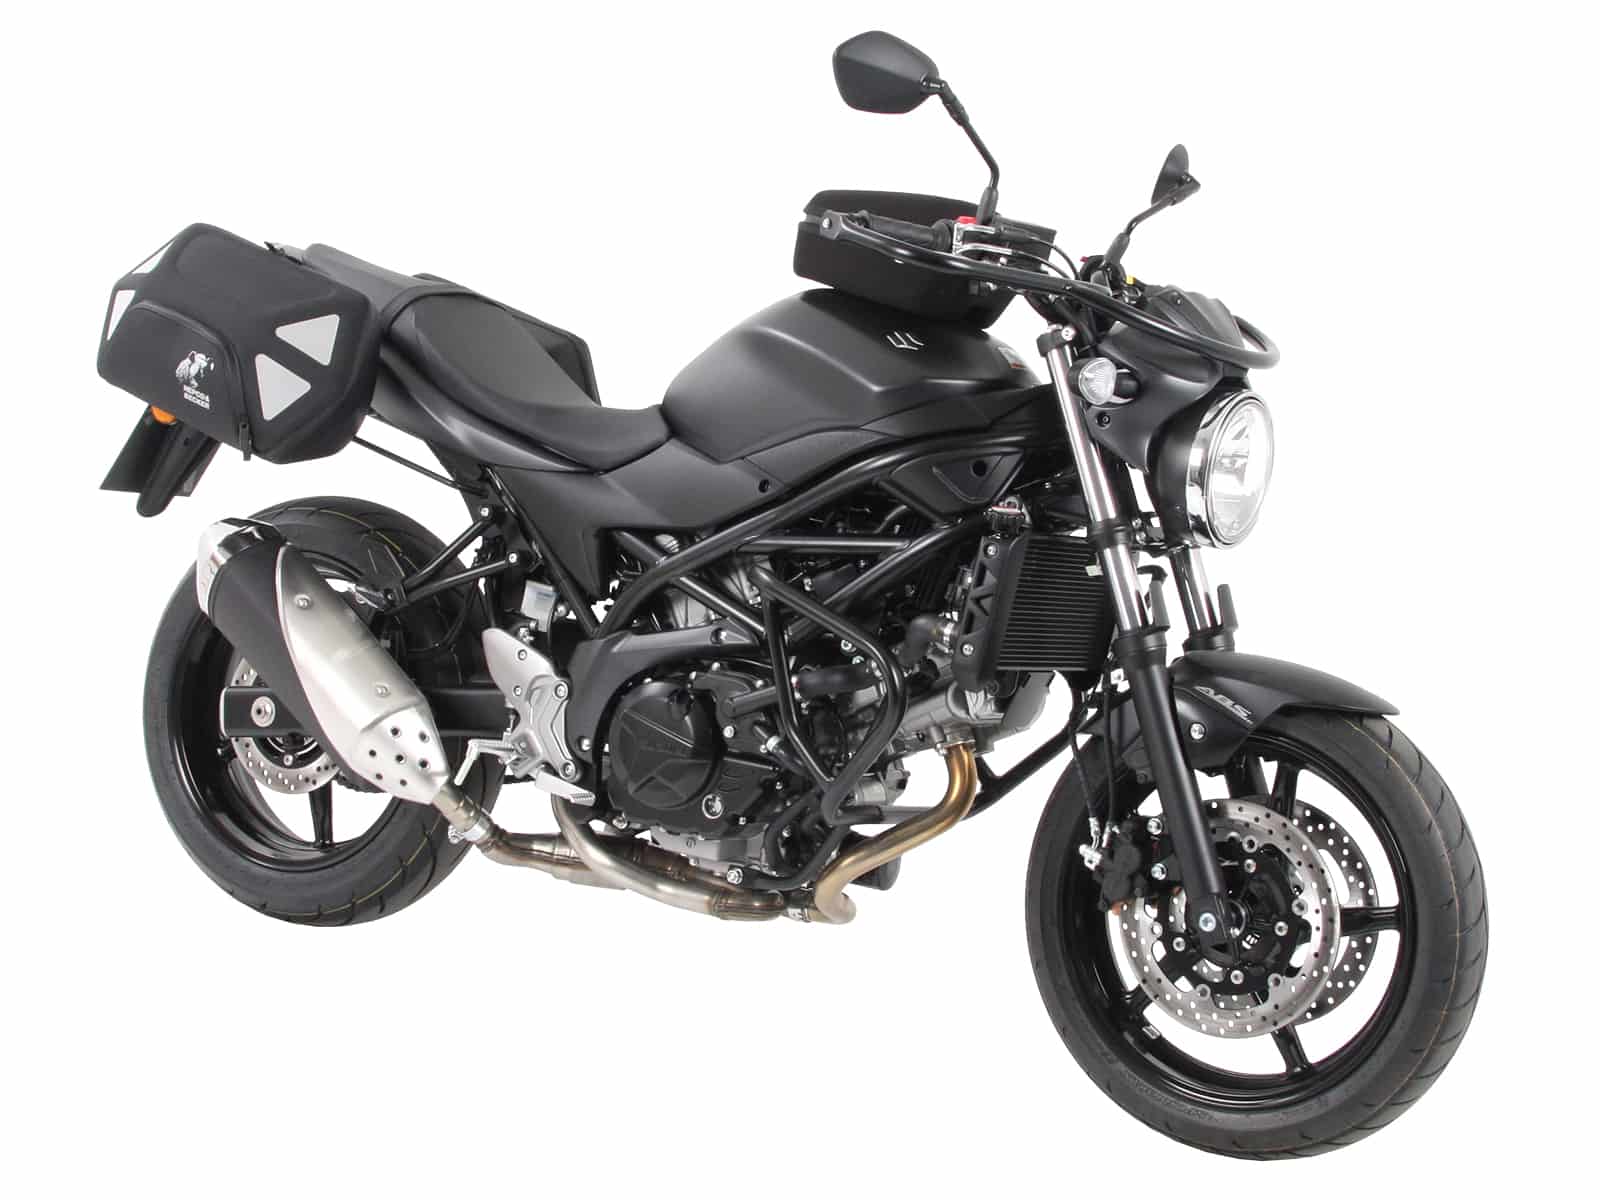 Front protection bar for Suzuki SV 650 from 2016